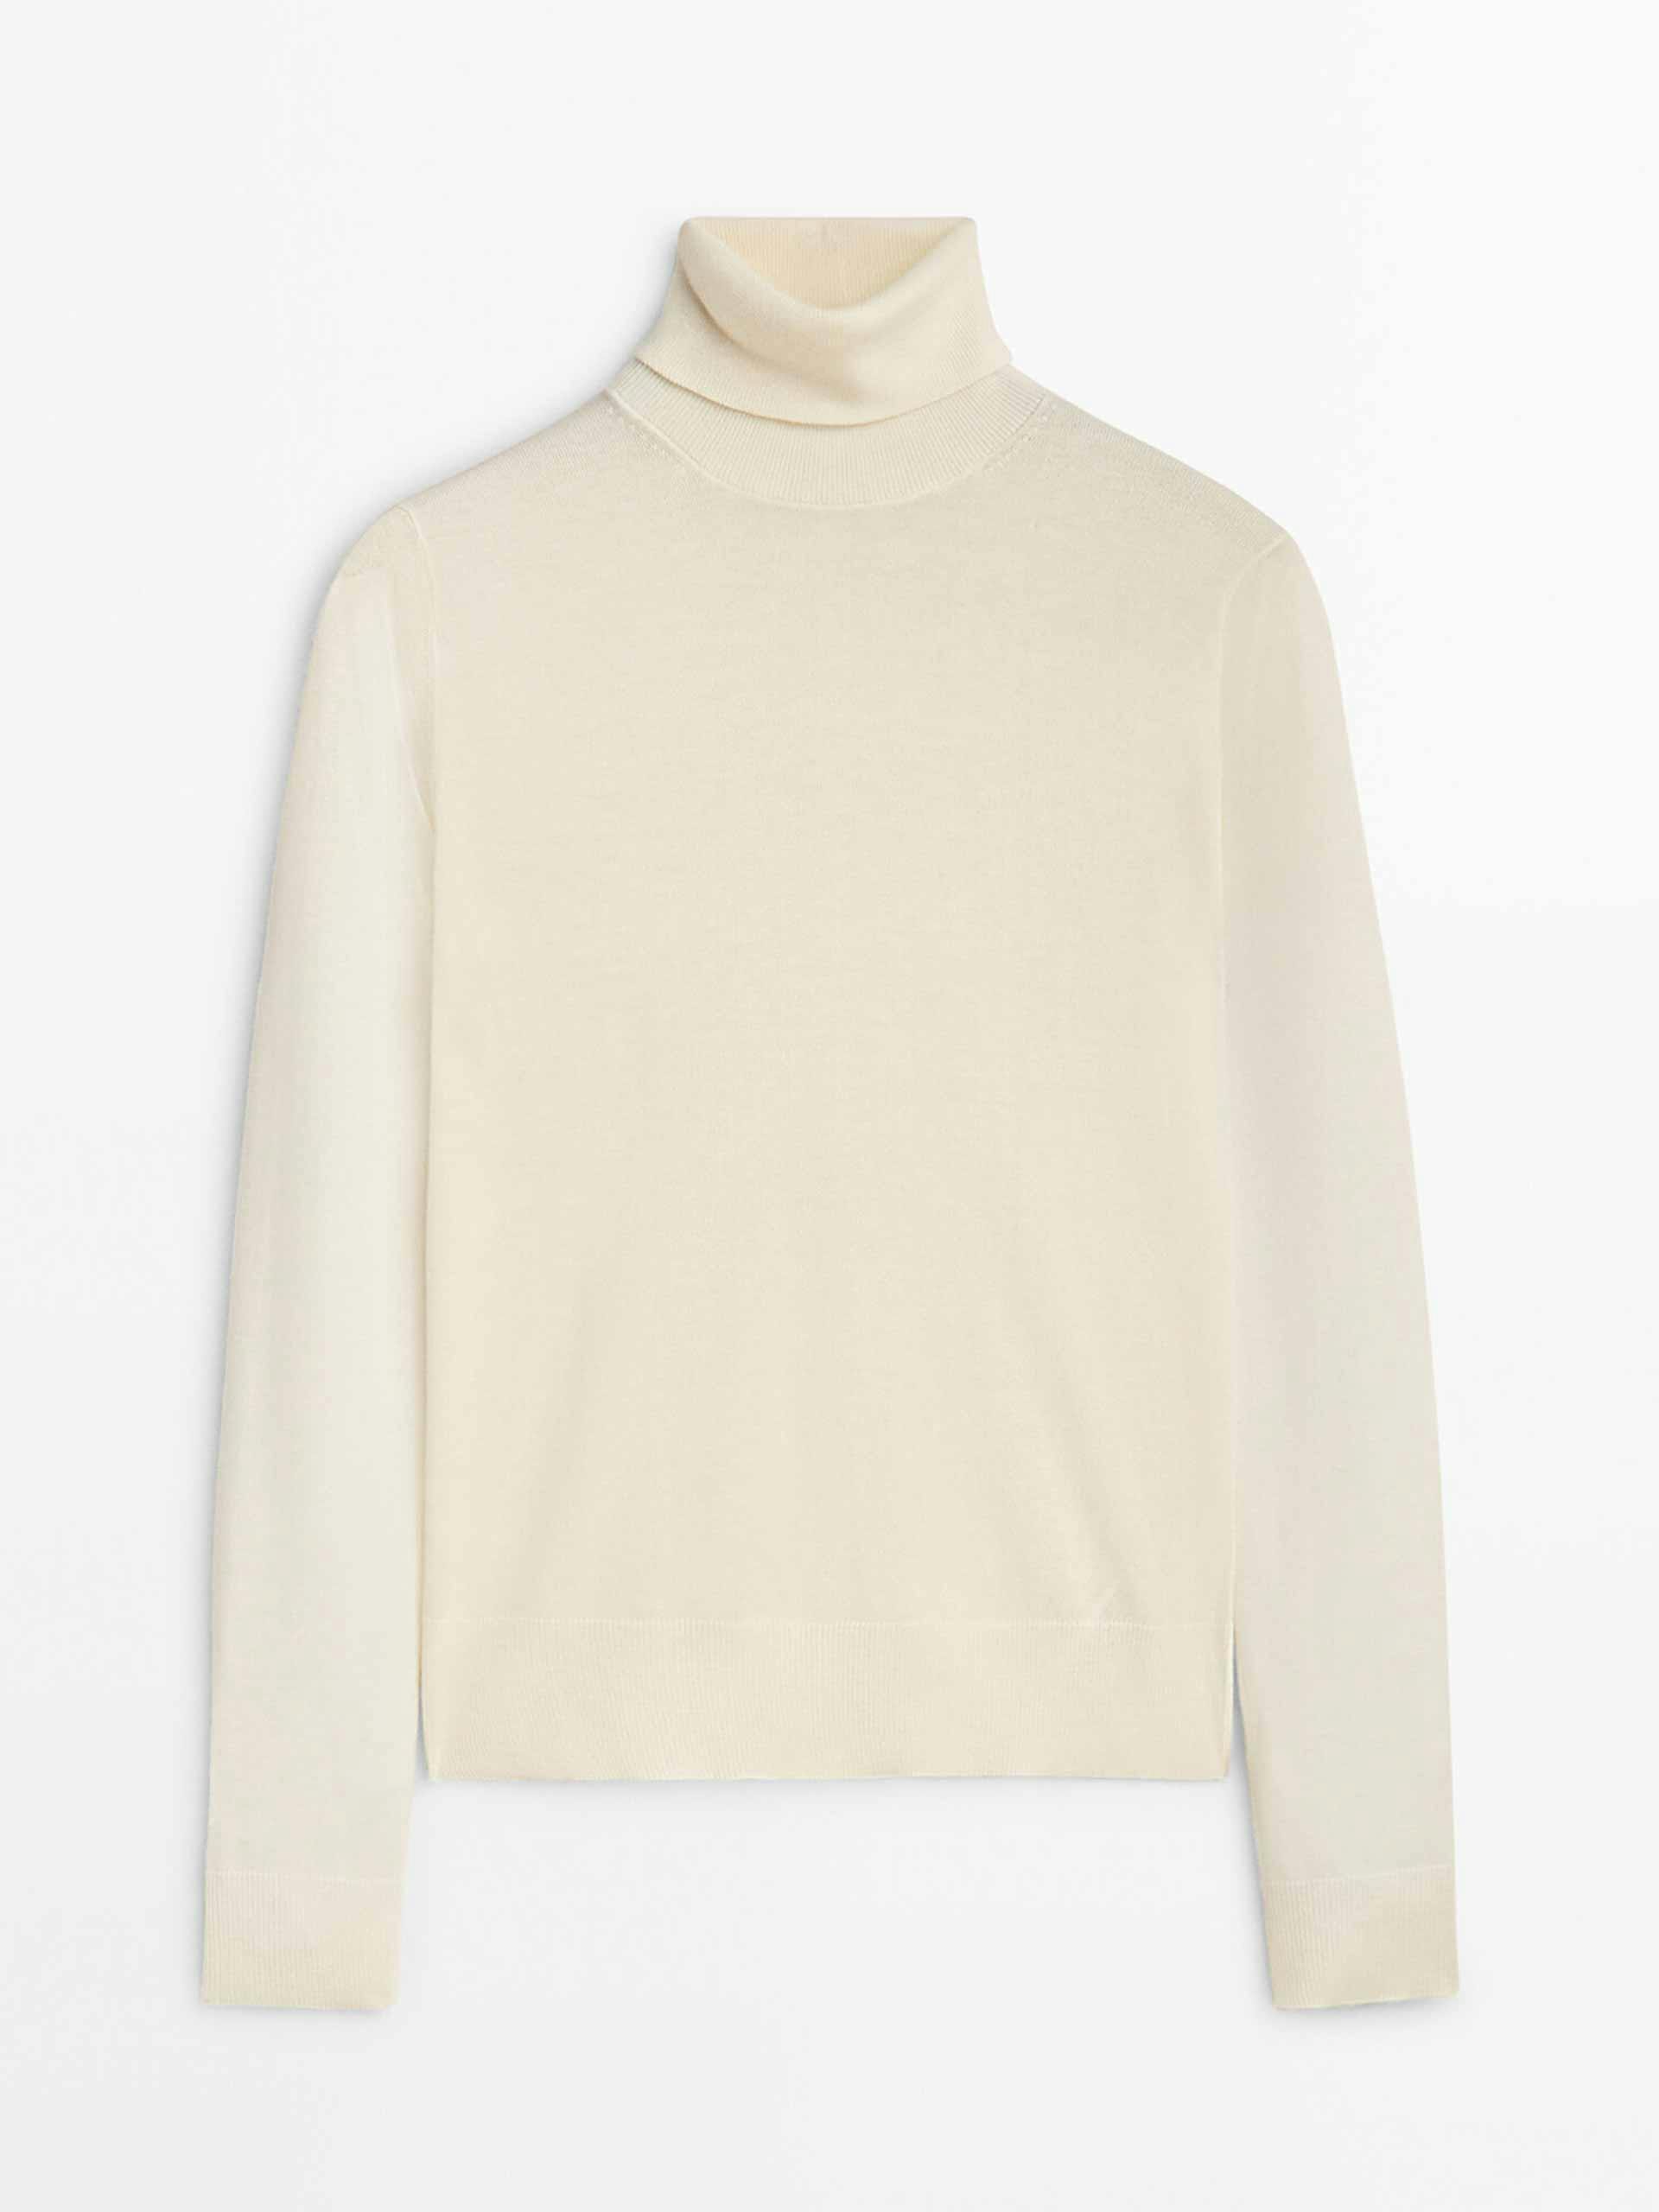 White long-sleeve high neck sweater